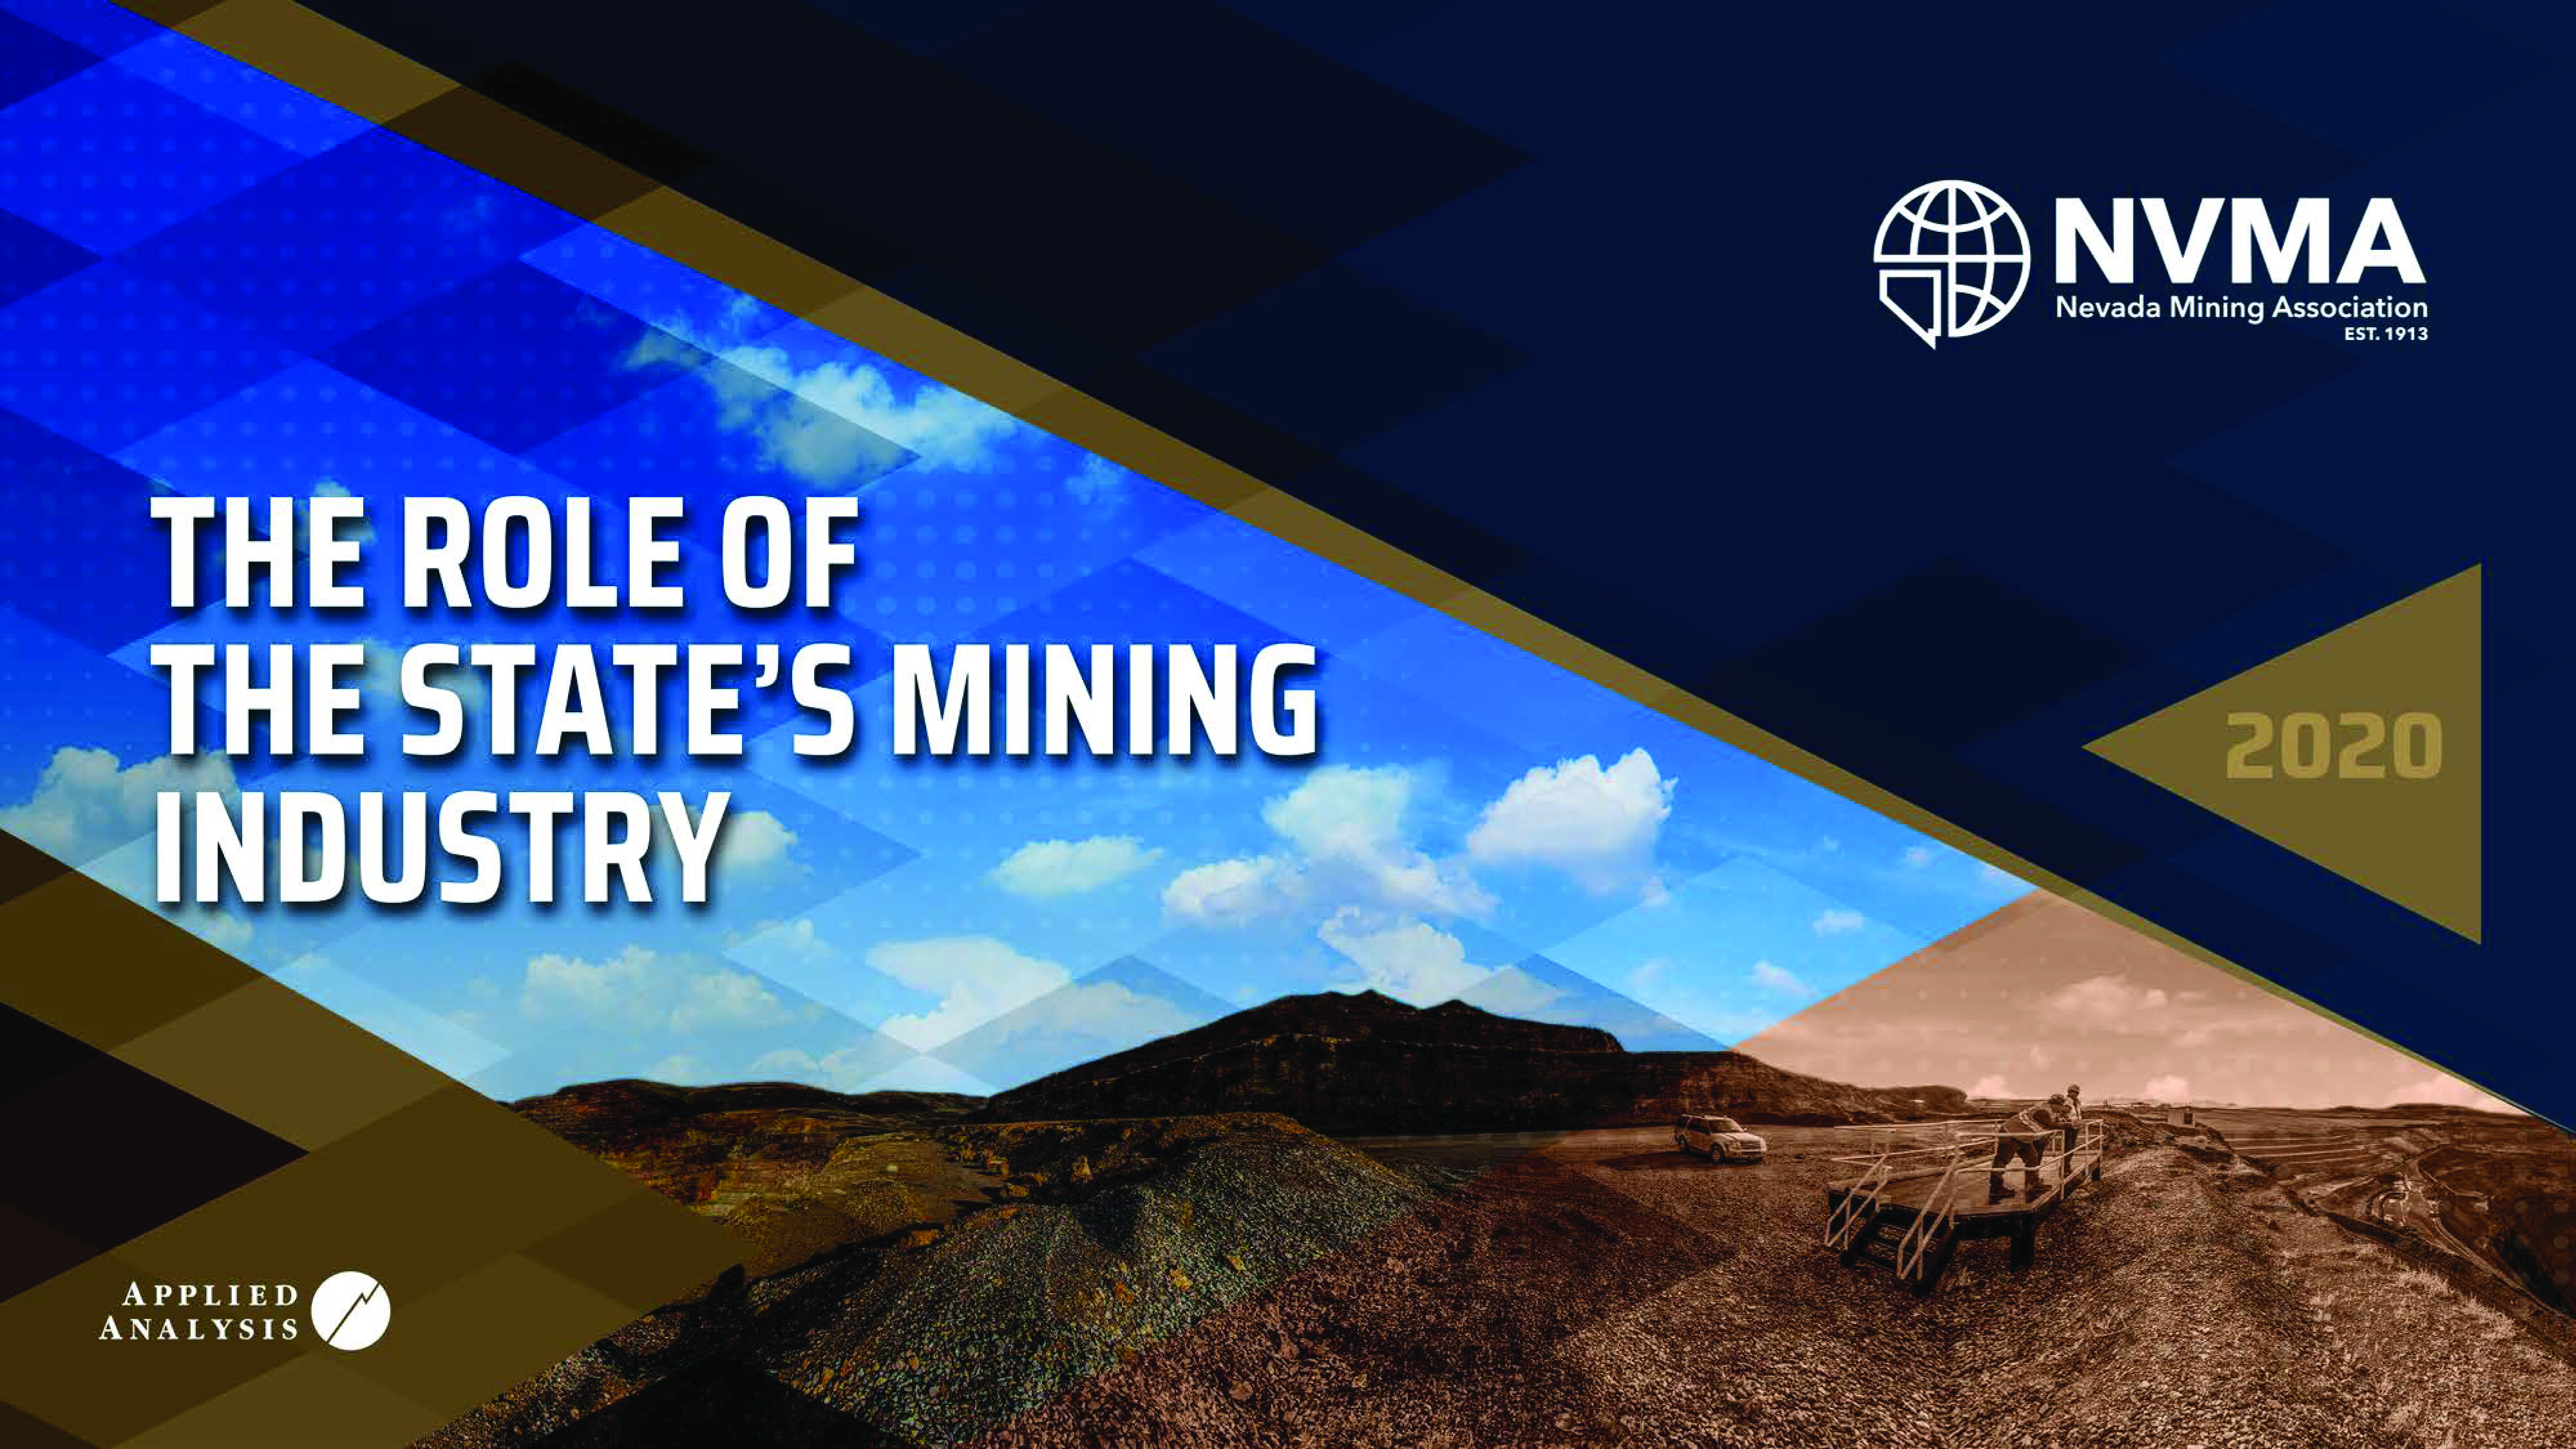 Nevada Mining Association The Role of the State's Mining Industry